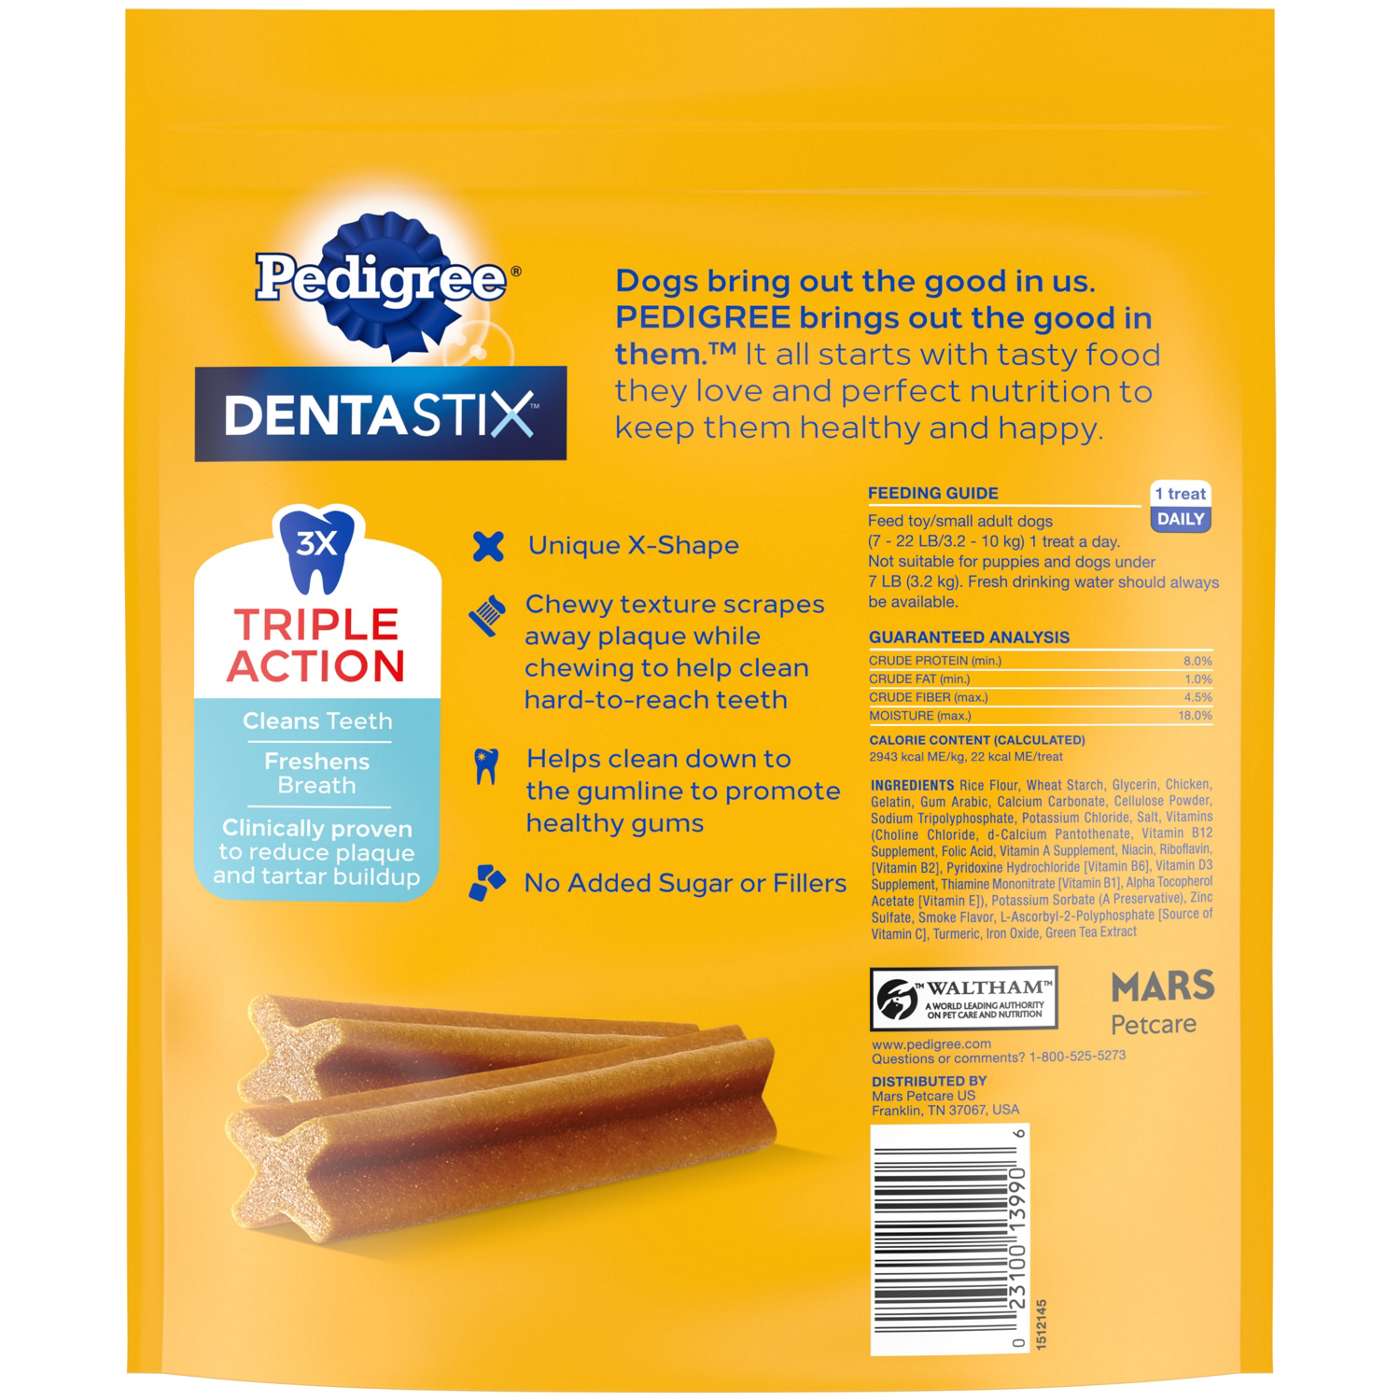 Pedigree DENTASTIX Daily Oral Care Toy & Small Dog Treats Value Size; image 4 of 5